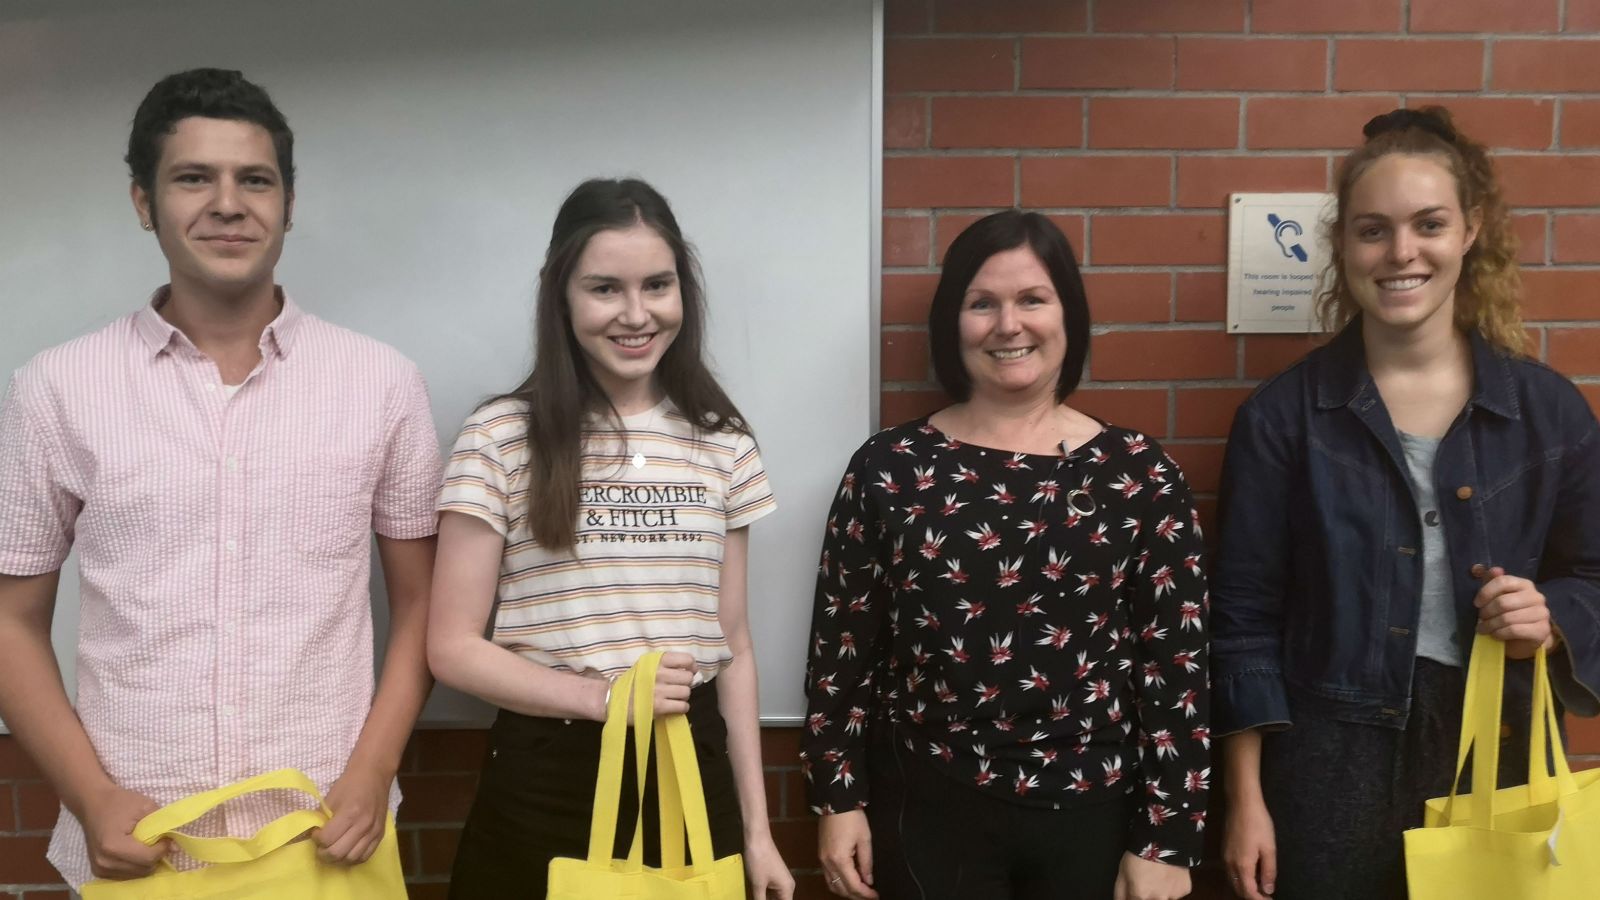 Intergen Young Achievers Award prize-giving for top first year students at Victoria University of Wellington – Kalid Norman Bibby, Charlotte Ann Best, and Emma Louise Westbrooke.